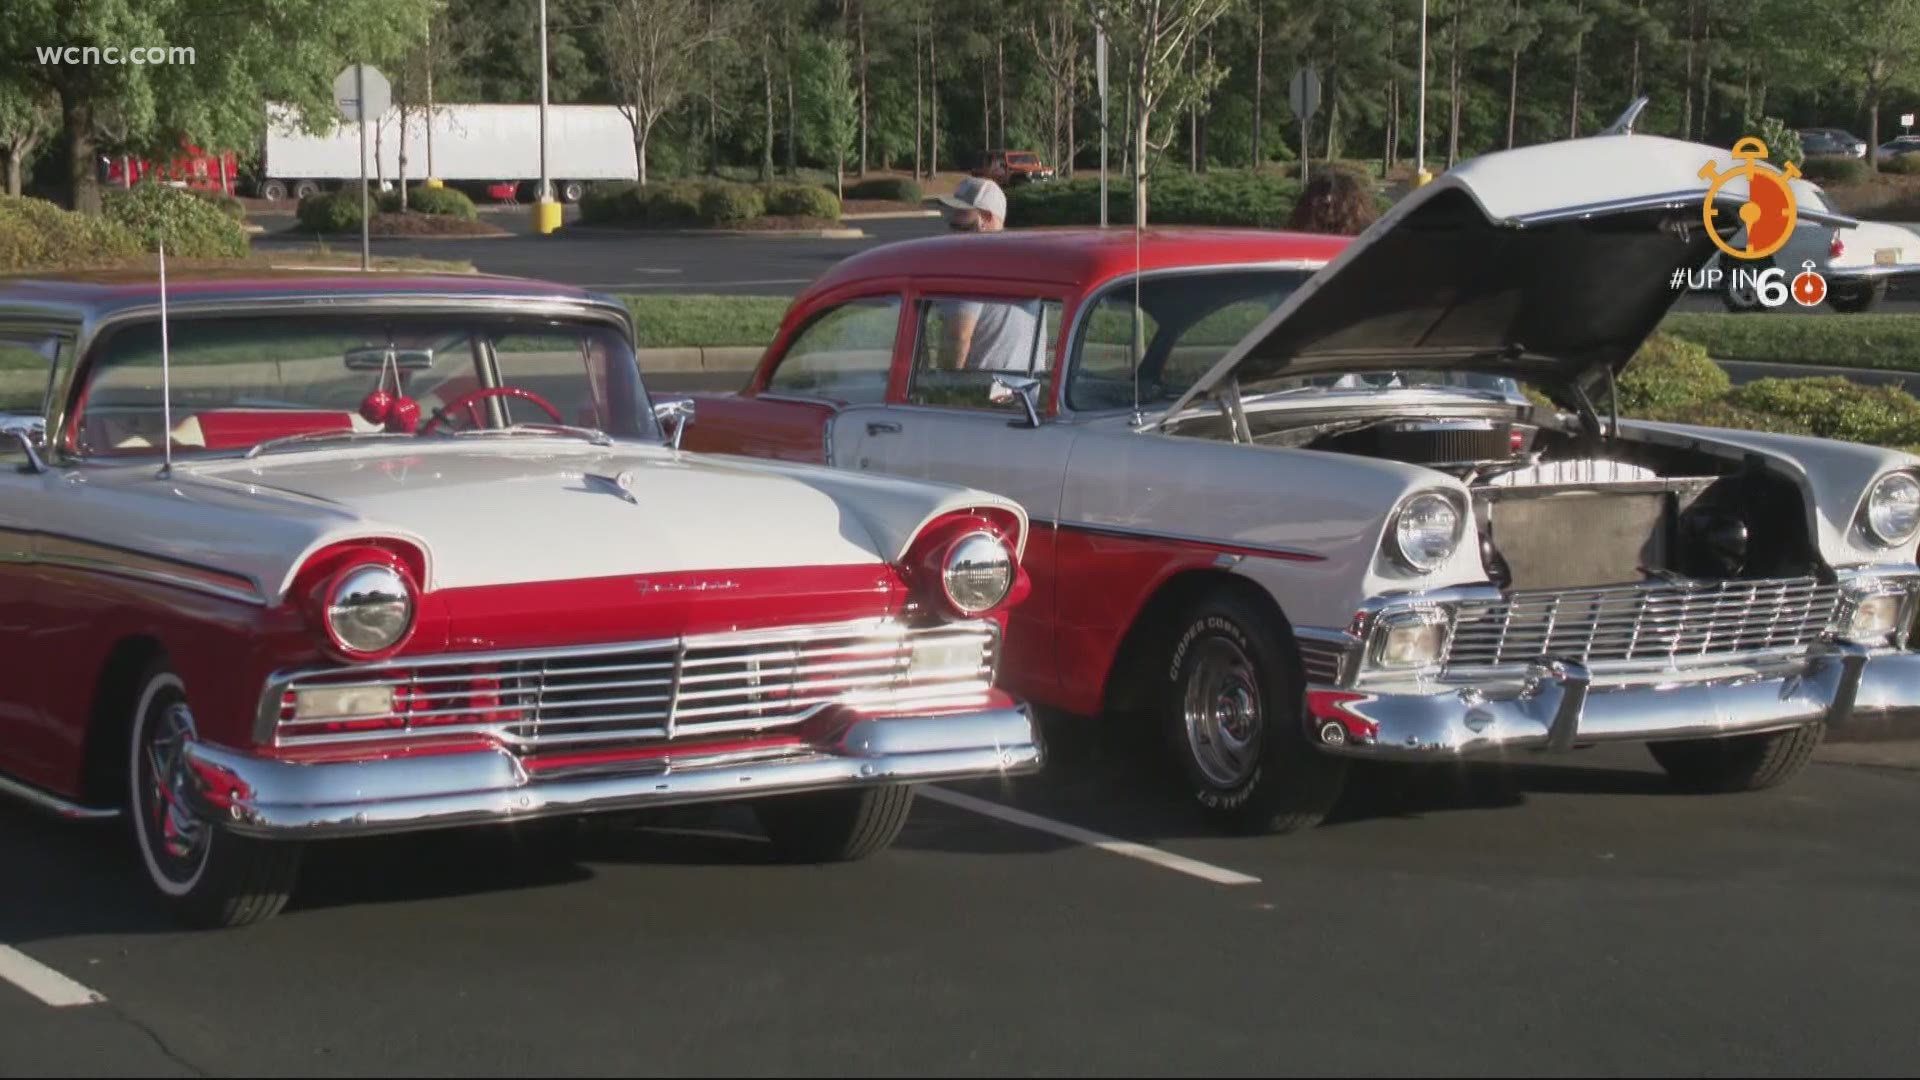 As we head into warmer weather, you'll start to see more car shows. But one group in Monroe, North Carolina, is showing off their classic rides throughout the year.